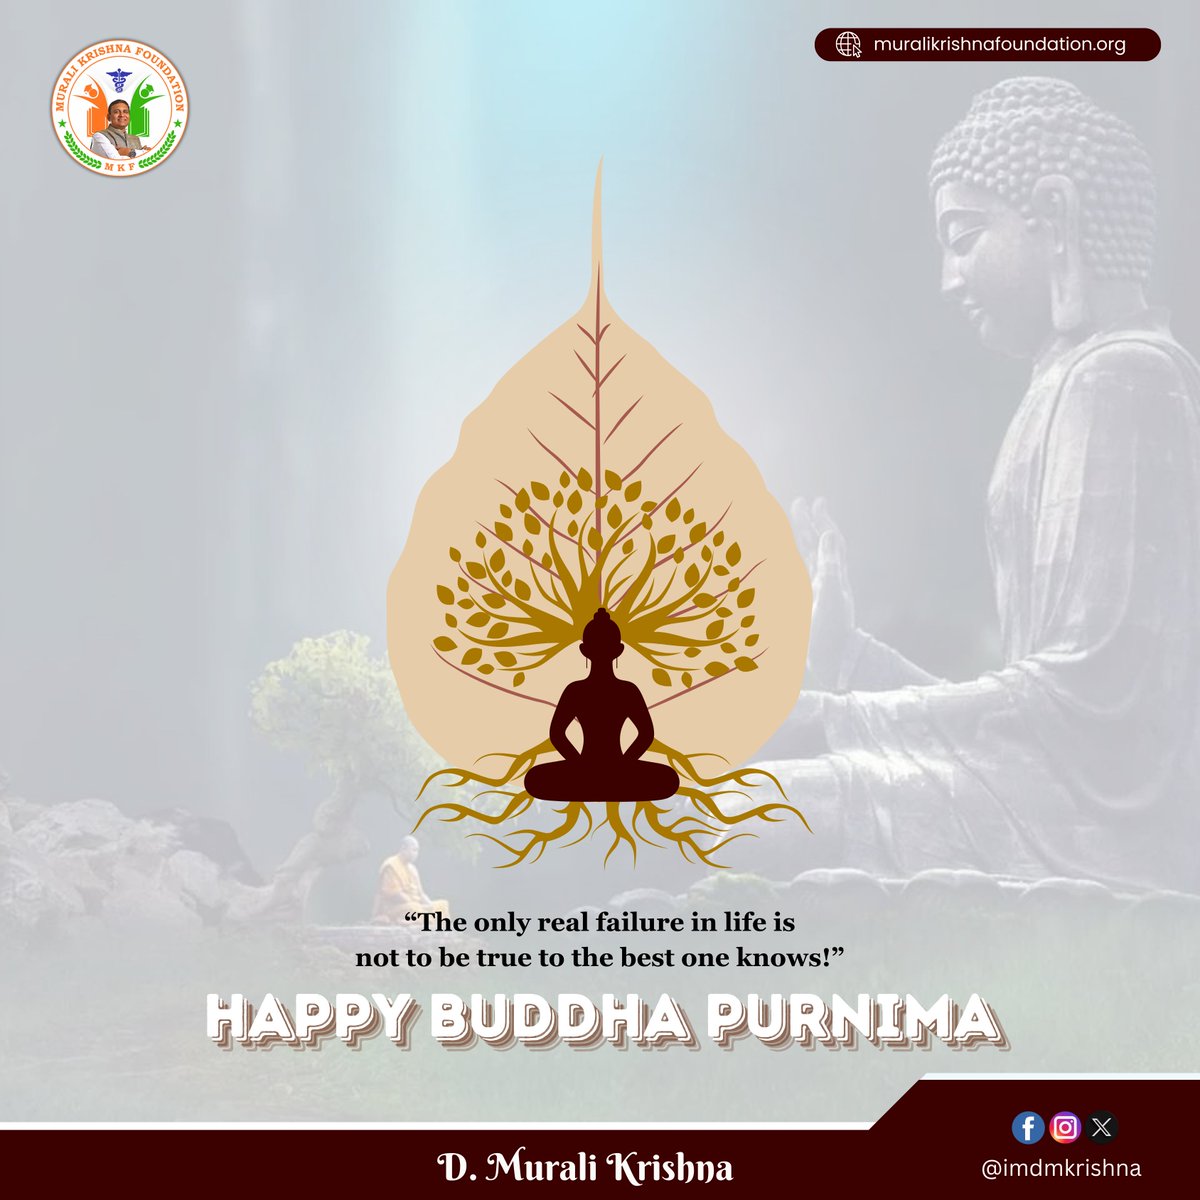 Buddha Purnima is a time to remember the profound teachings of Lord Buddha. His guidance on living a life of compassion, mindfulness and inner peace remains relevant and inspiring.

#dmuralikrishna #bargarh #Odisha #buddha #BuddhaPurnima